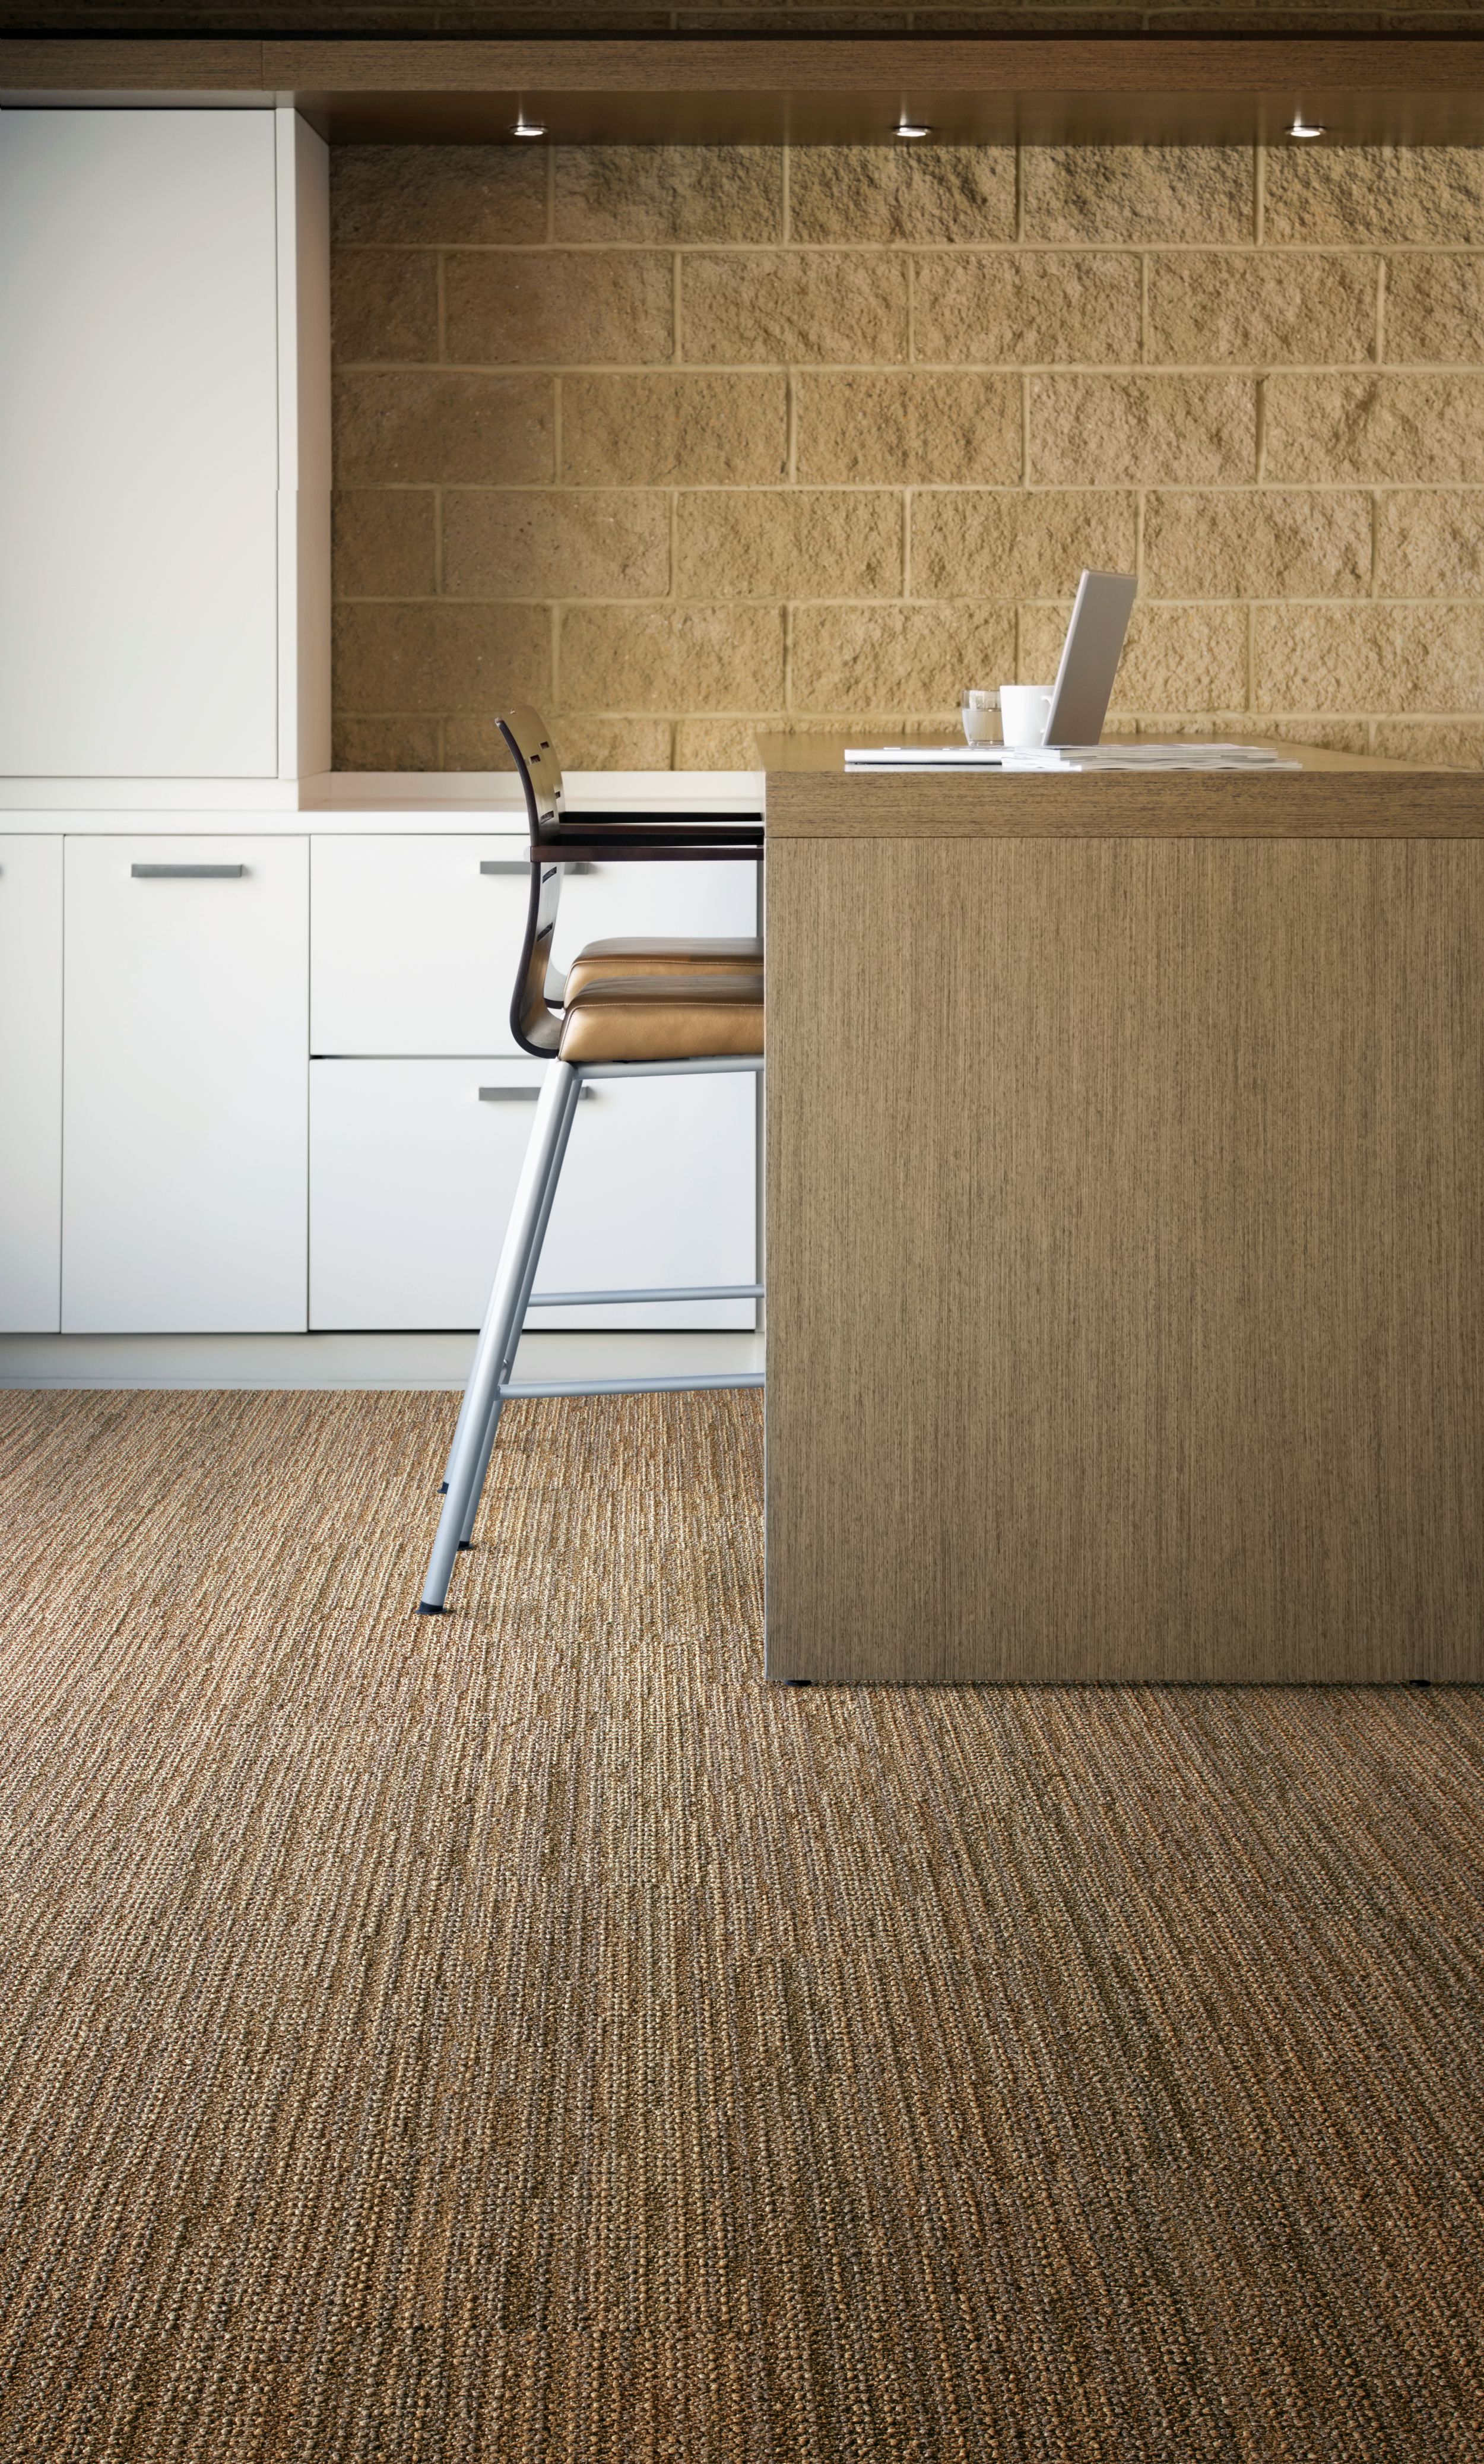 Interface Afternoon Light carpet tile in workspace with white file cabinets and desk imagen número 1